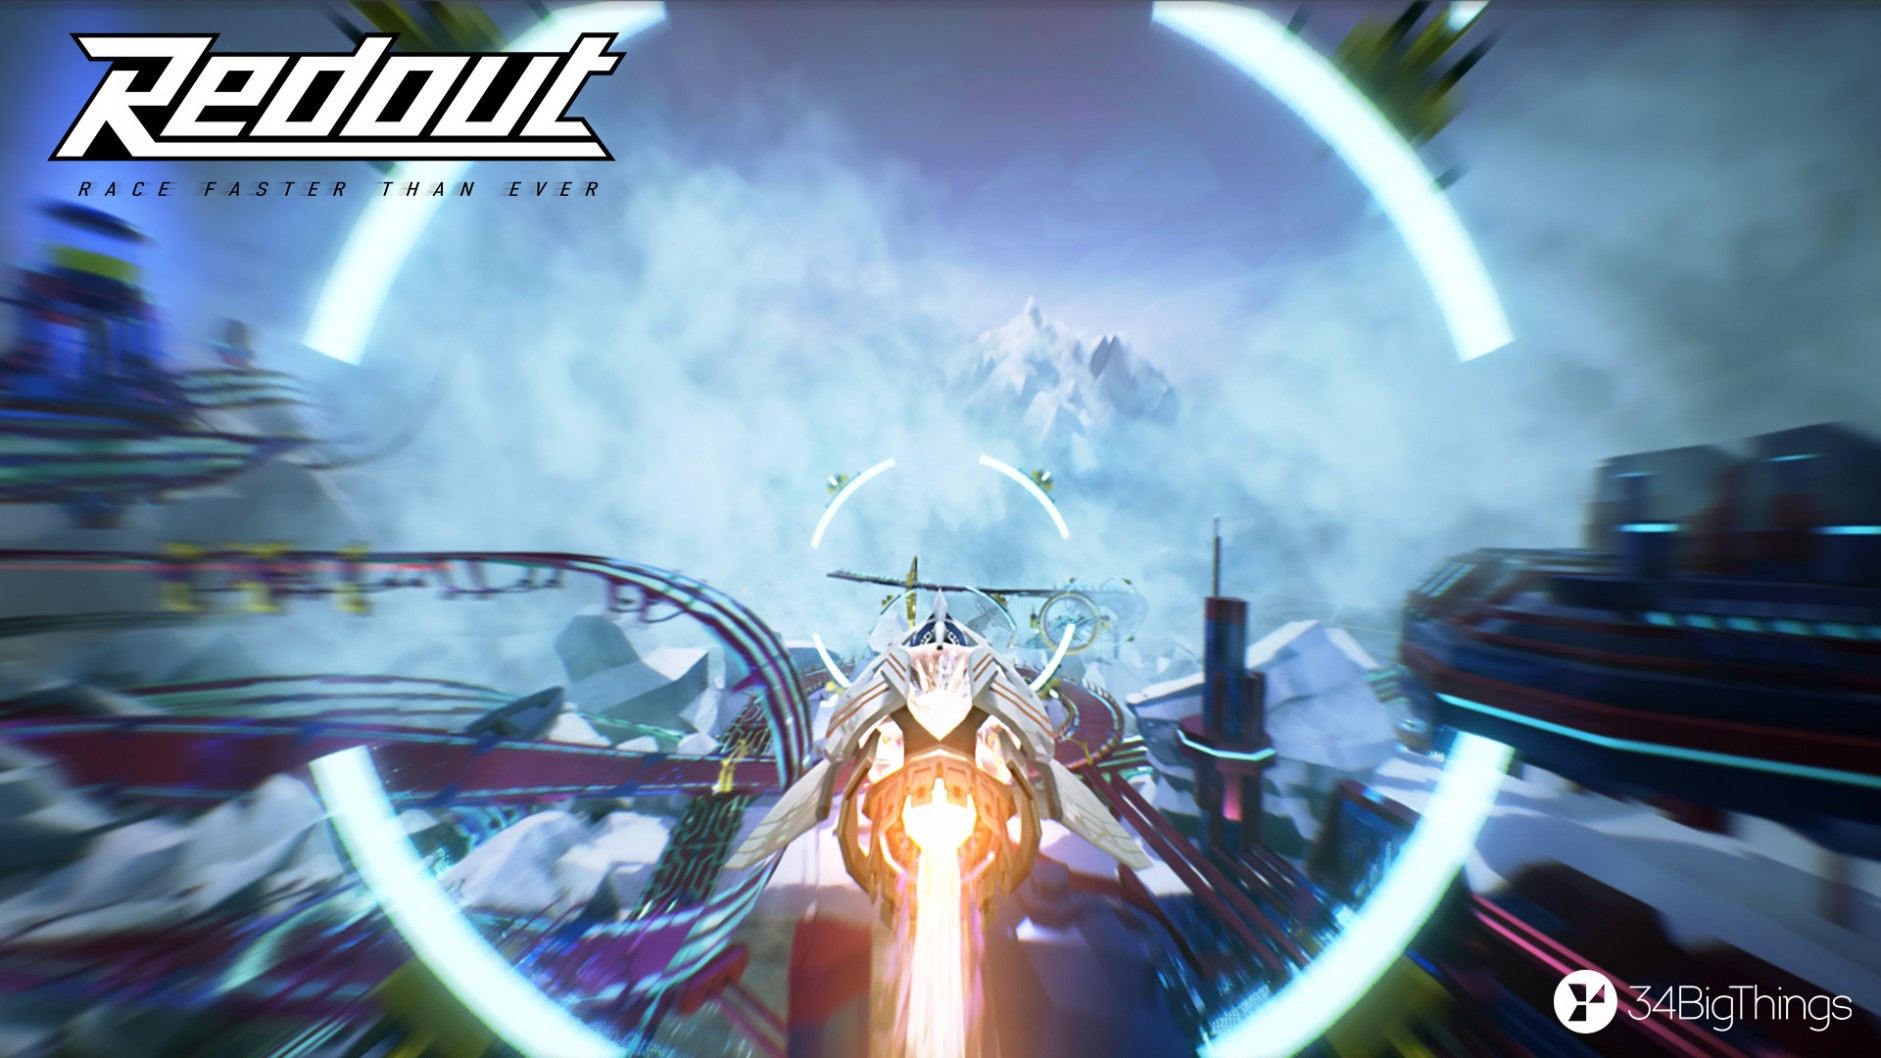 Redout Features